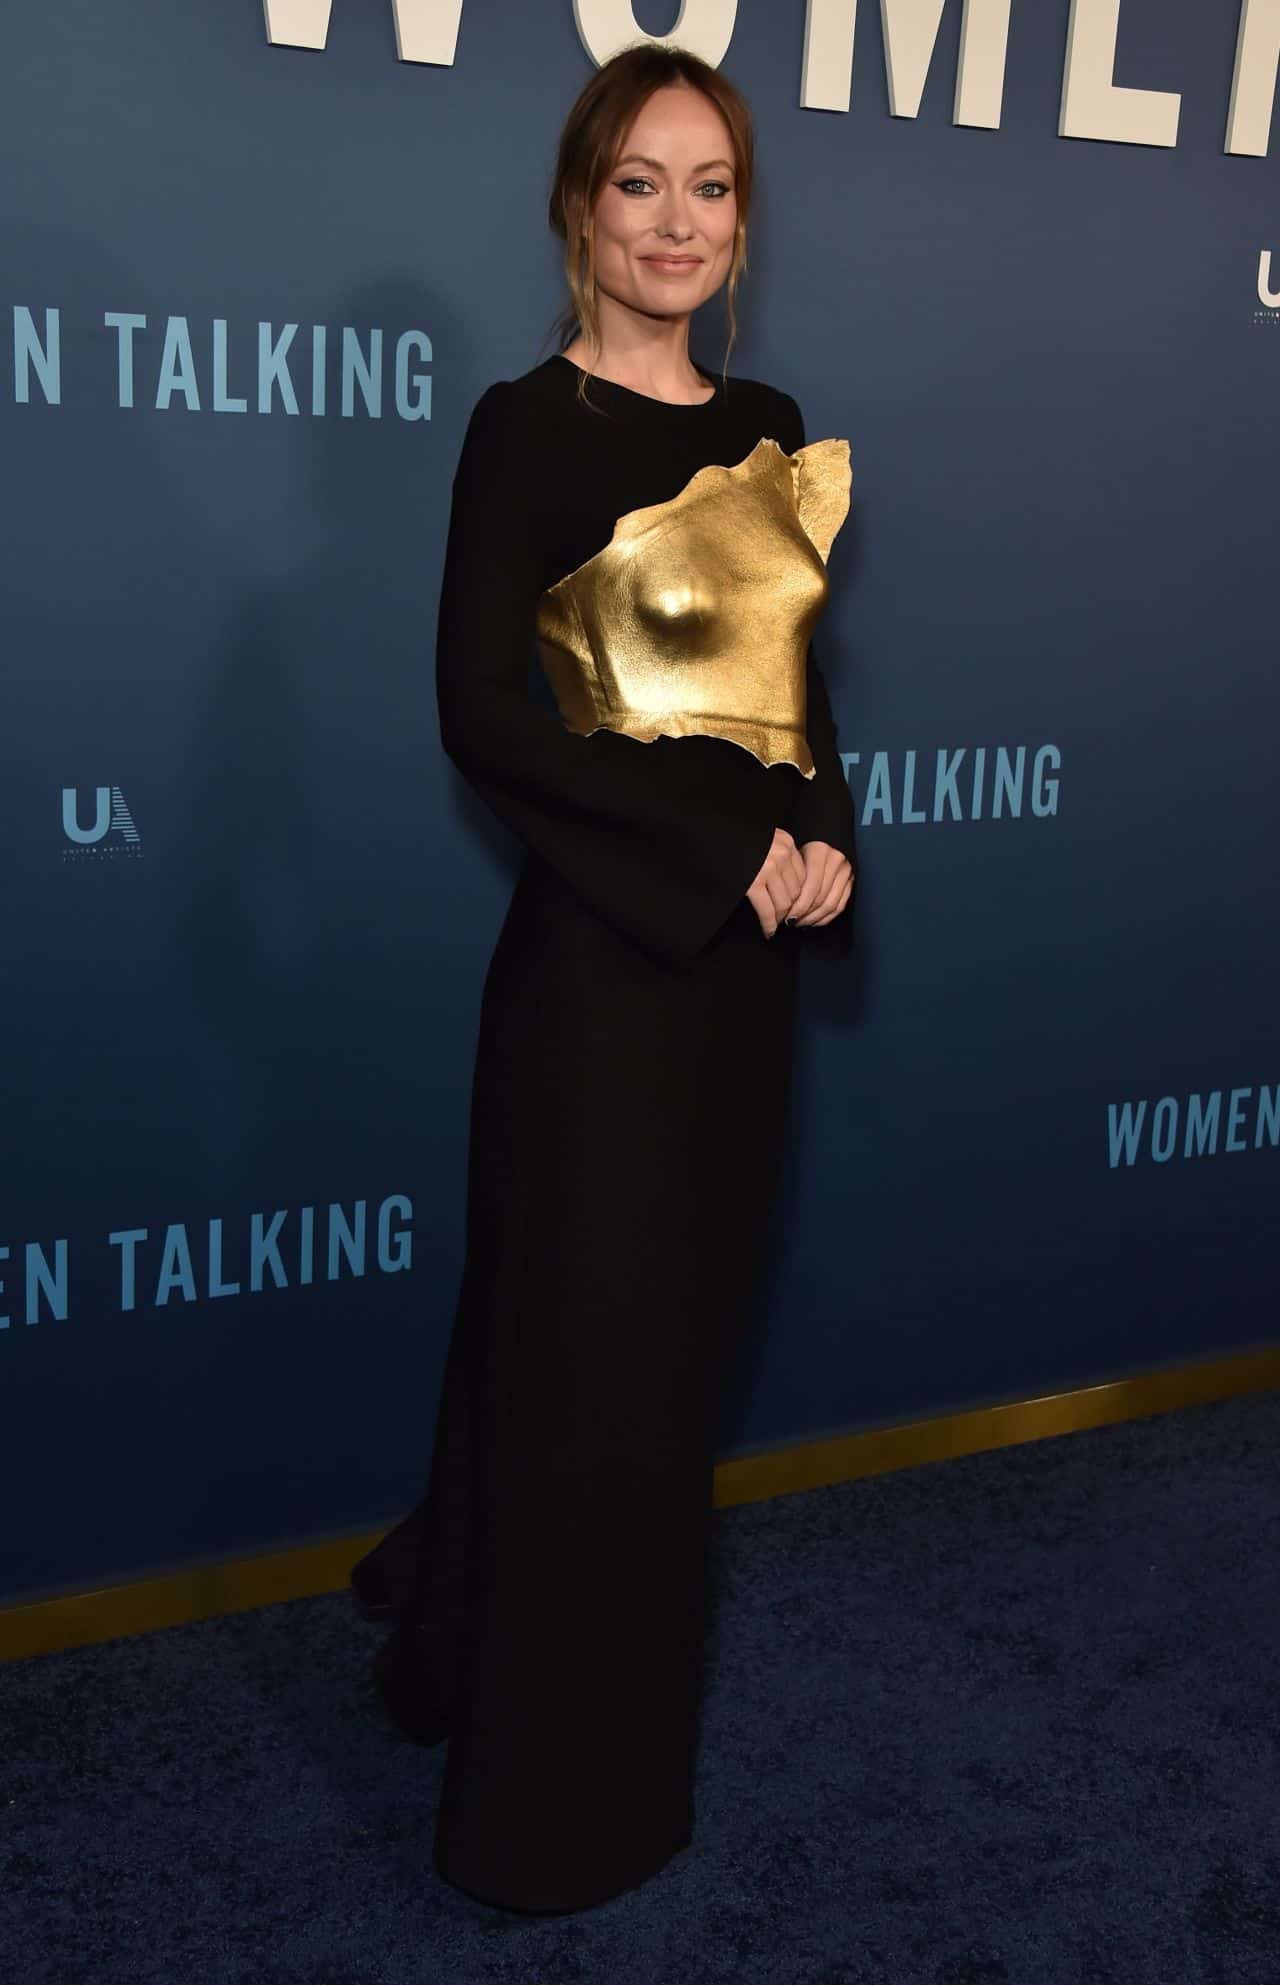 Olivia Wilde Wore a Gold Breastplate at the "Women Talking" Premiere in LA